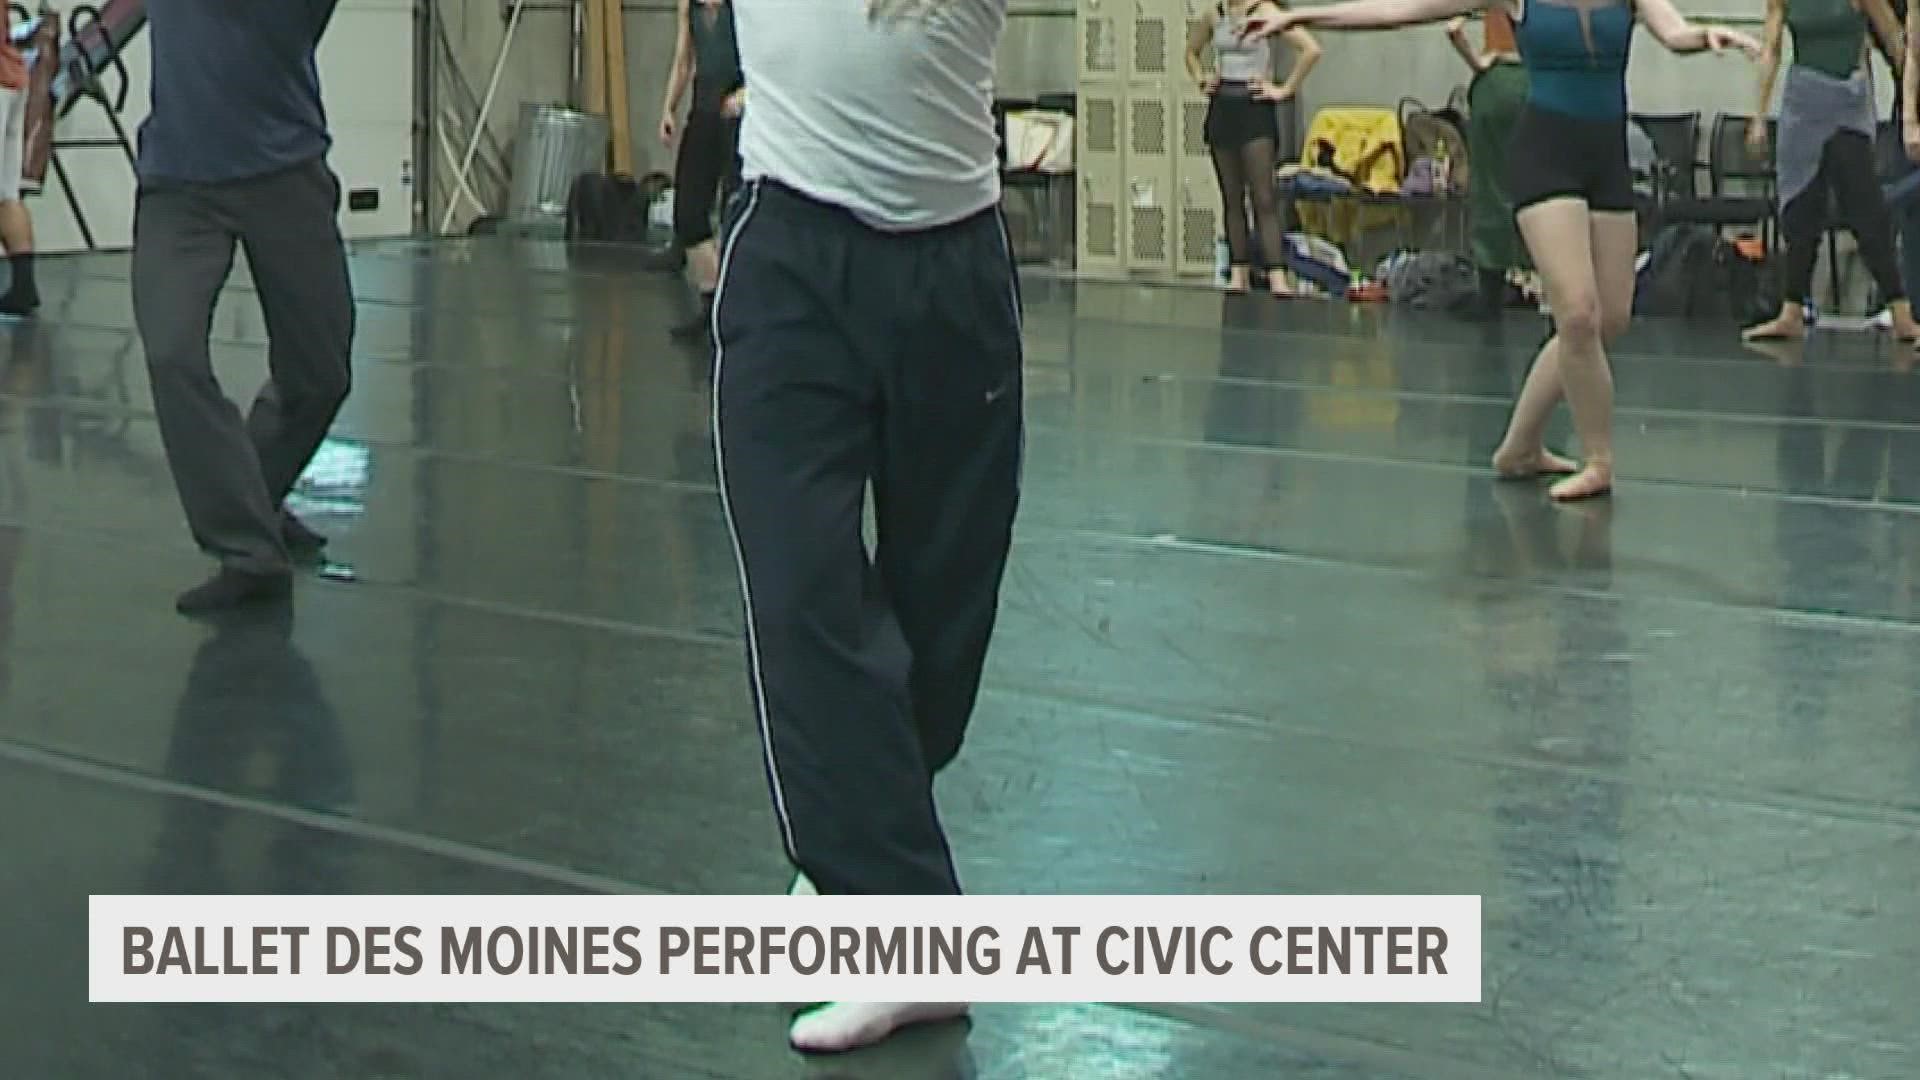 Ballet Des Moines is performing tonight for the first time at the Des Moines Civic Center, since April of 2019, and they have a new artistic director.